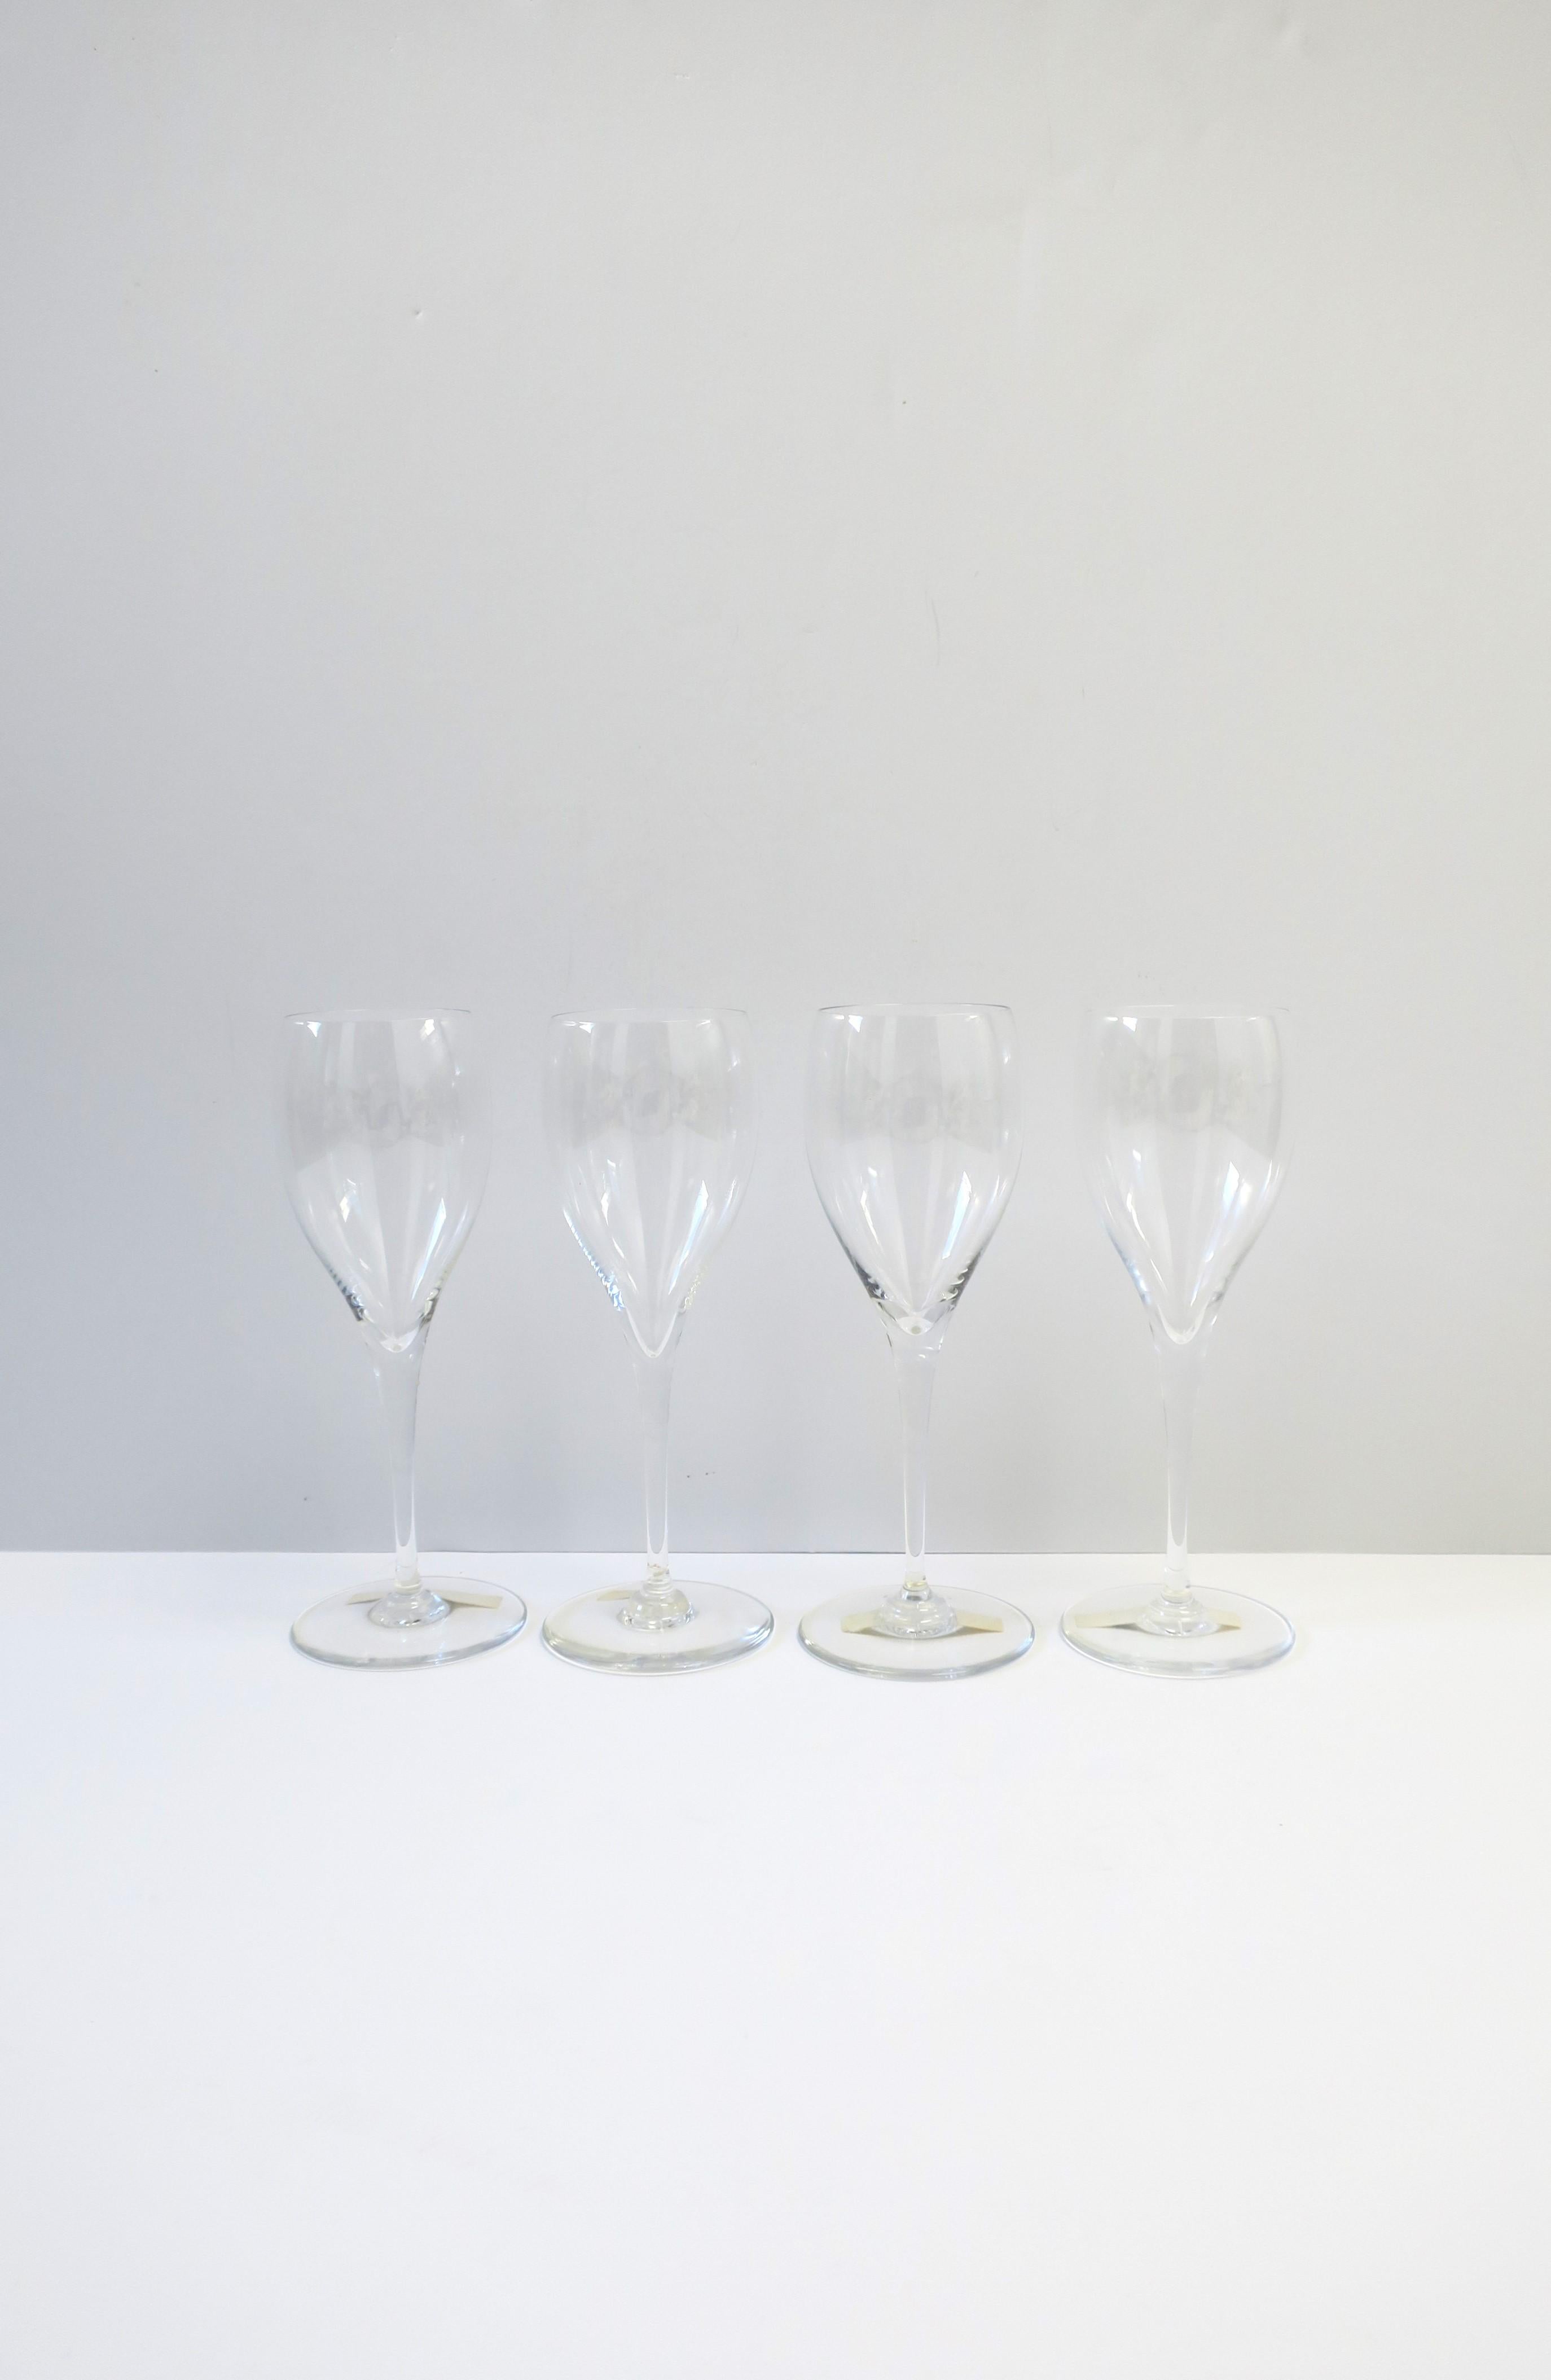 A beautiful set of four (4) French crystal cocktail or Champagne flutes / glasses in the St Remy design from luxury Maison, Baccarat, circa late-20th century, France. With makers' acid mark on bottom of all four: 